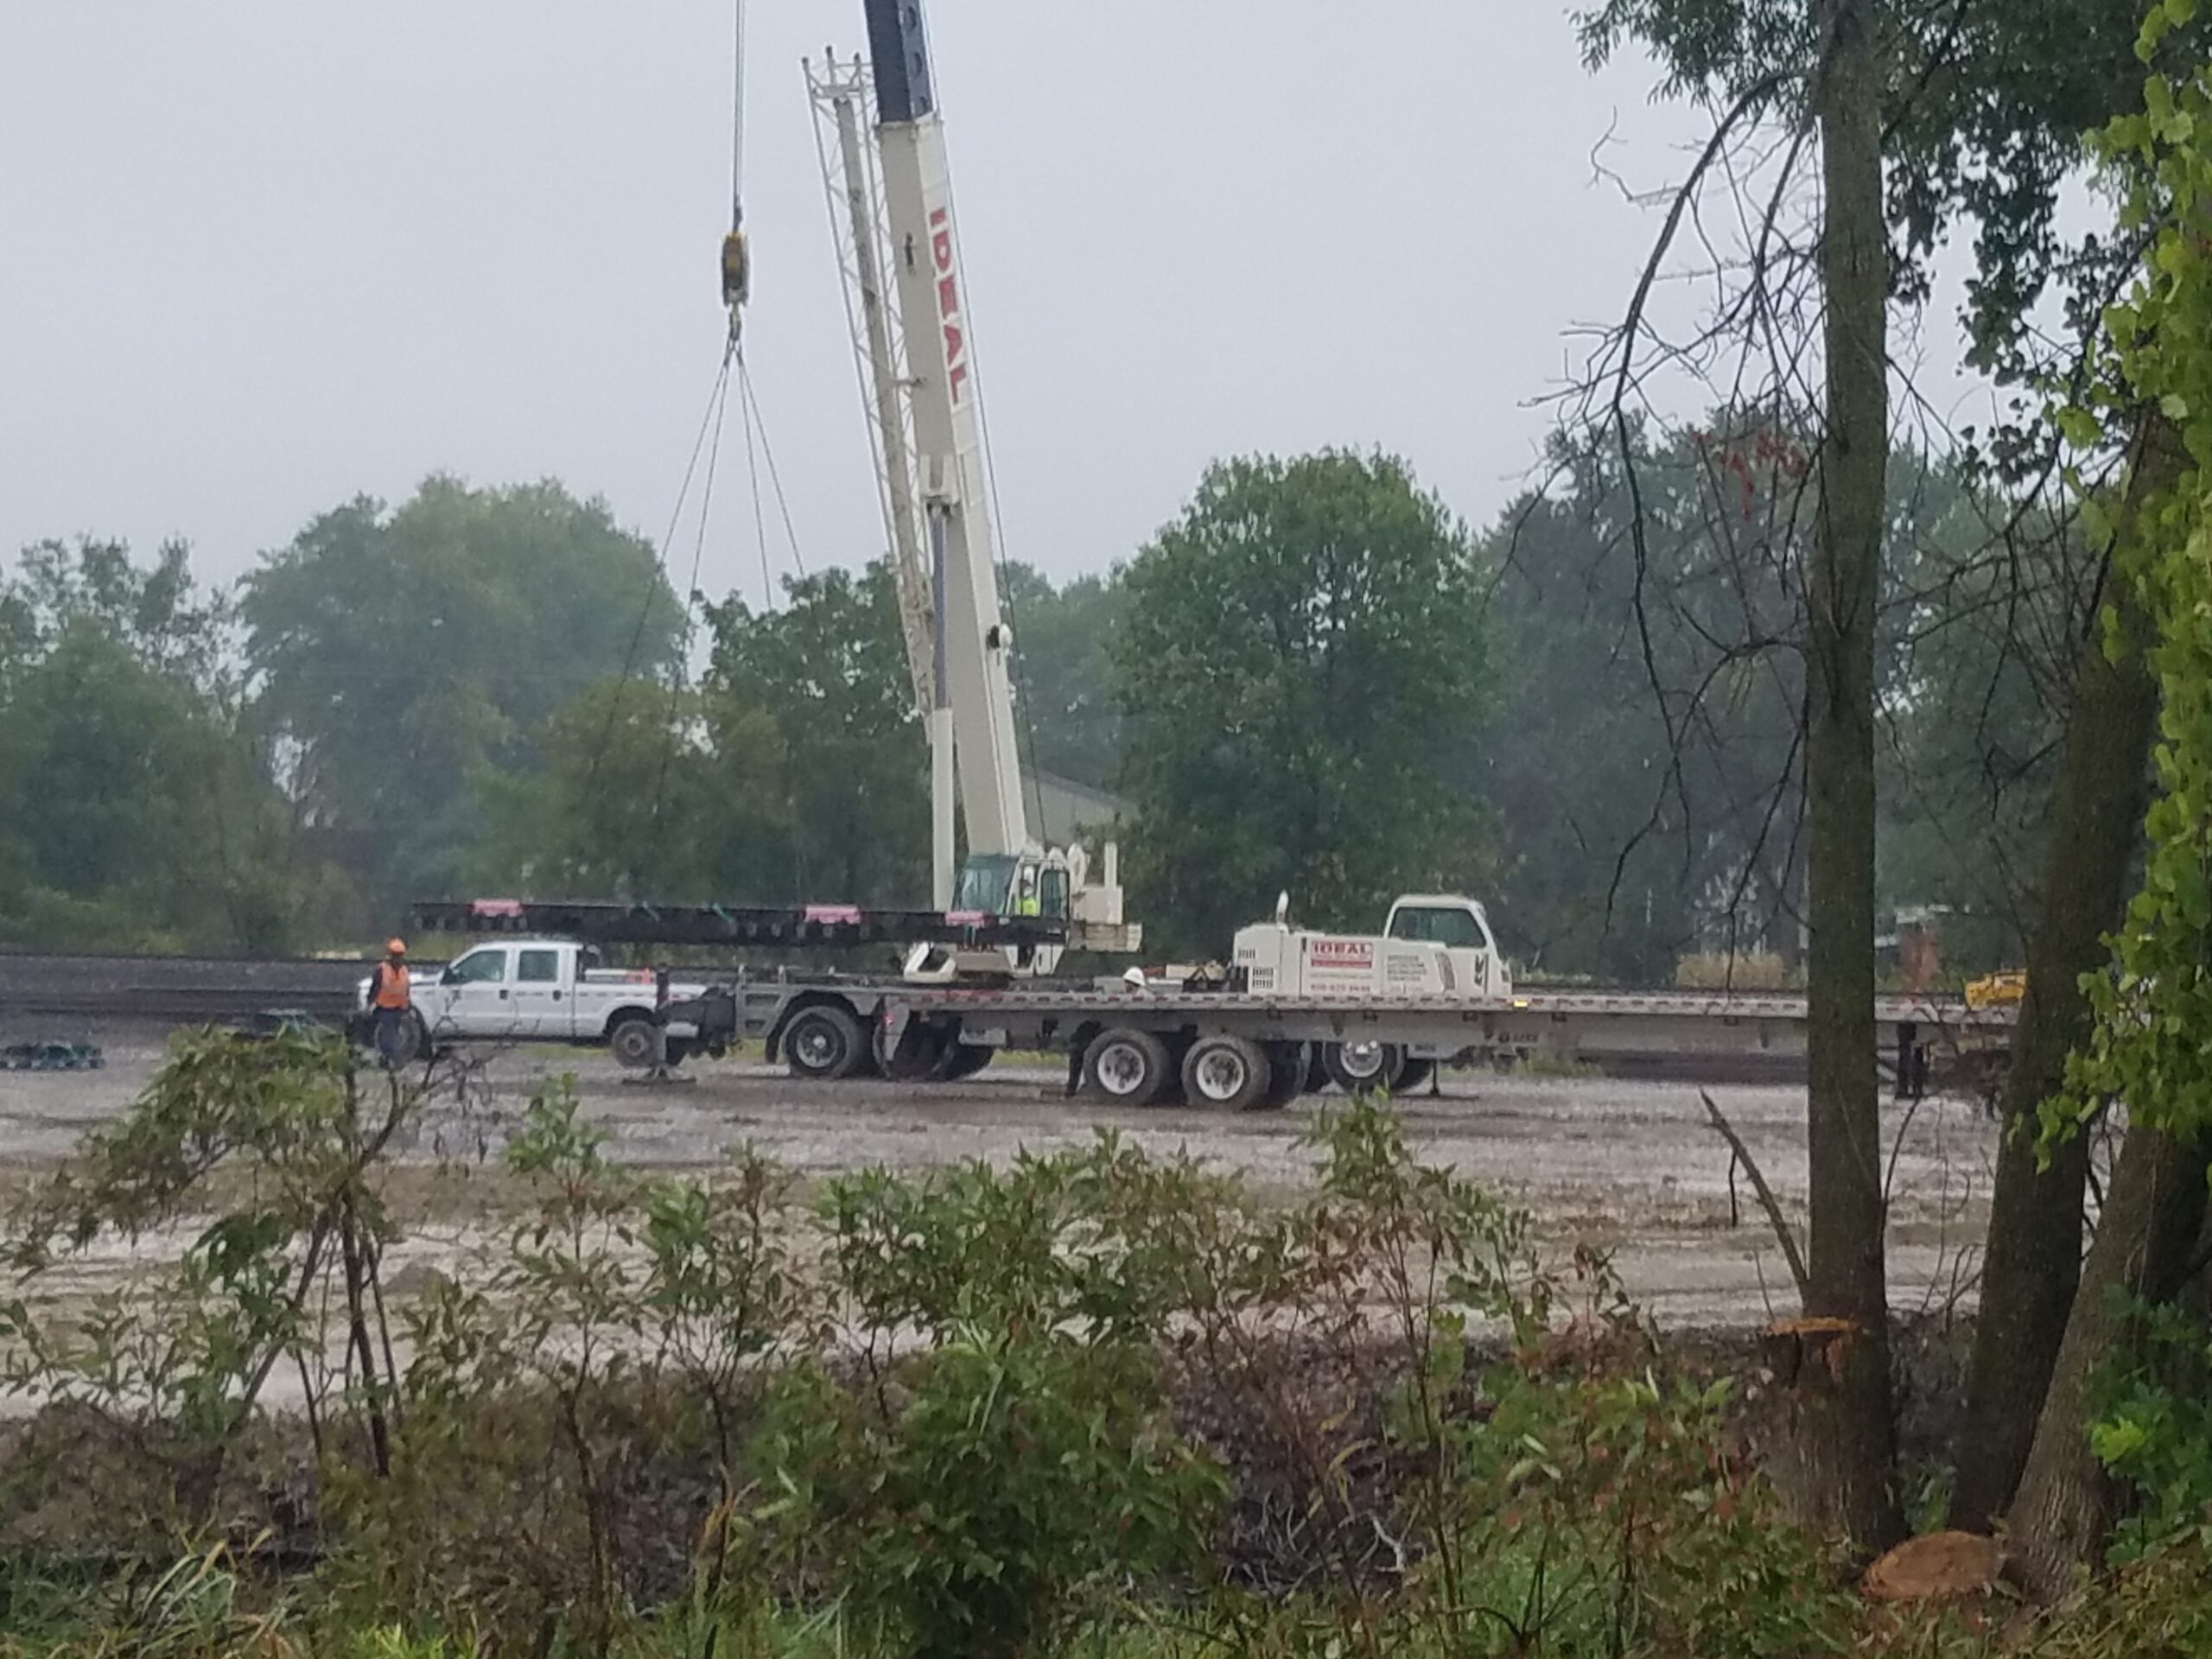 A white crane lifting a section of track from a flatbed trailer.